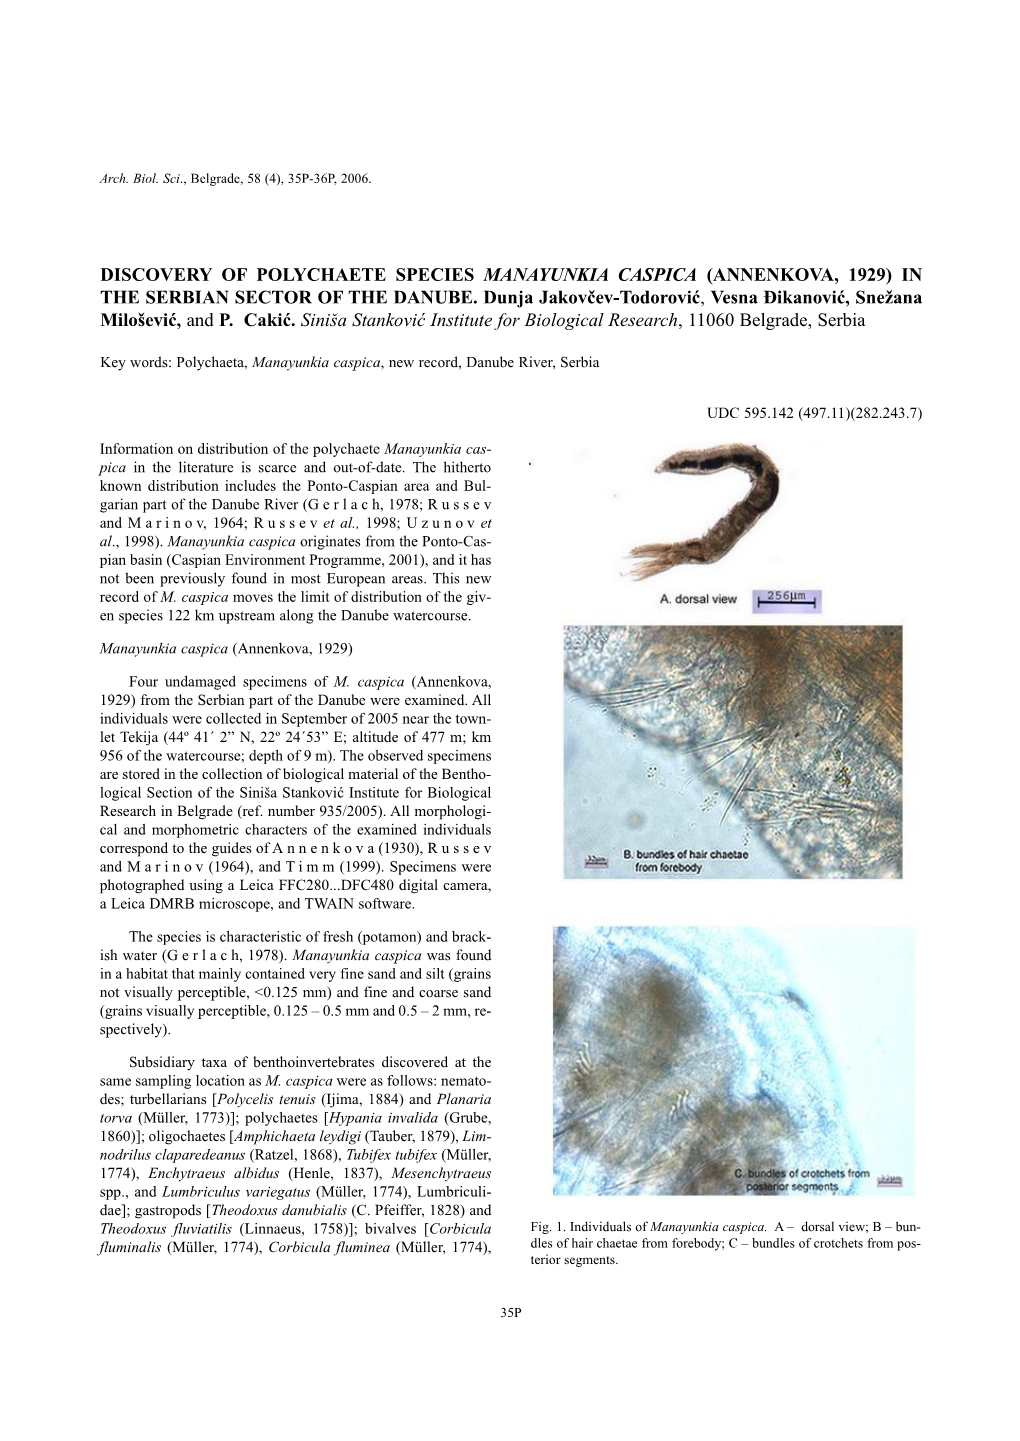 Discovery of Polychaete Species Manayunkia Caspica (Annenkova, 1929) in the Serbian Sector of the Danube